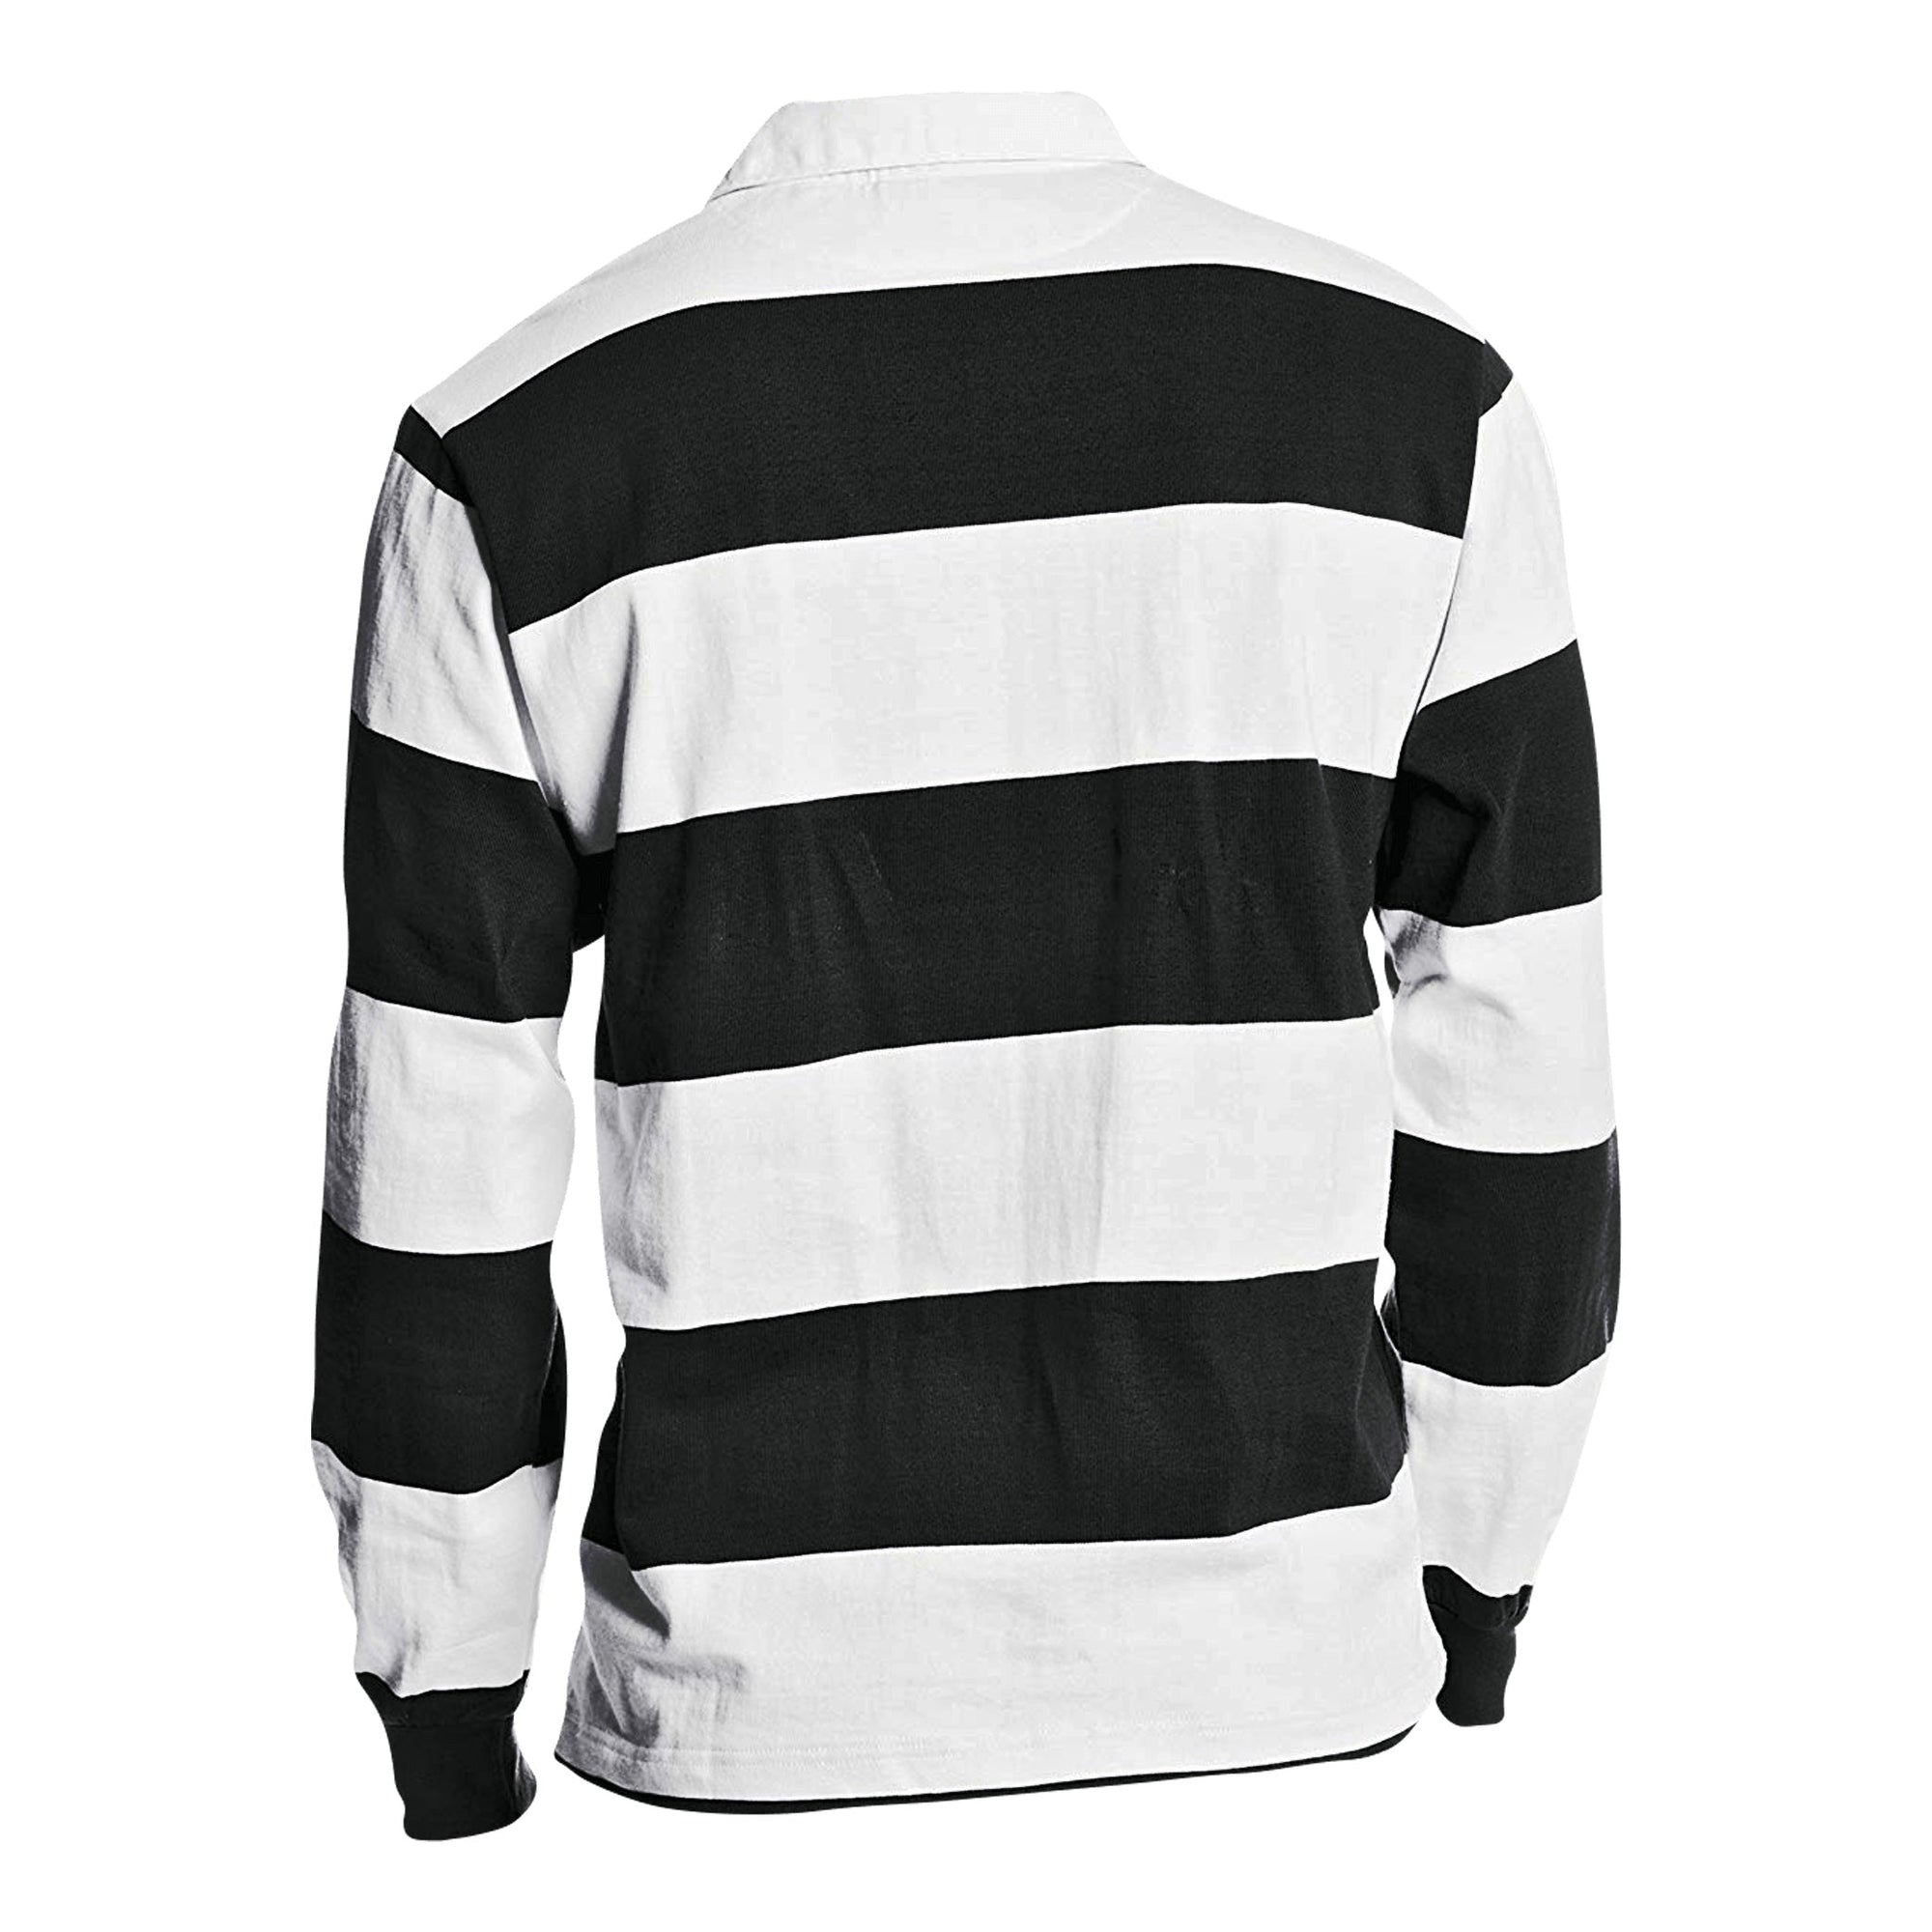 Rugby Imports Montclair Cotton Social Jersey